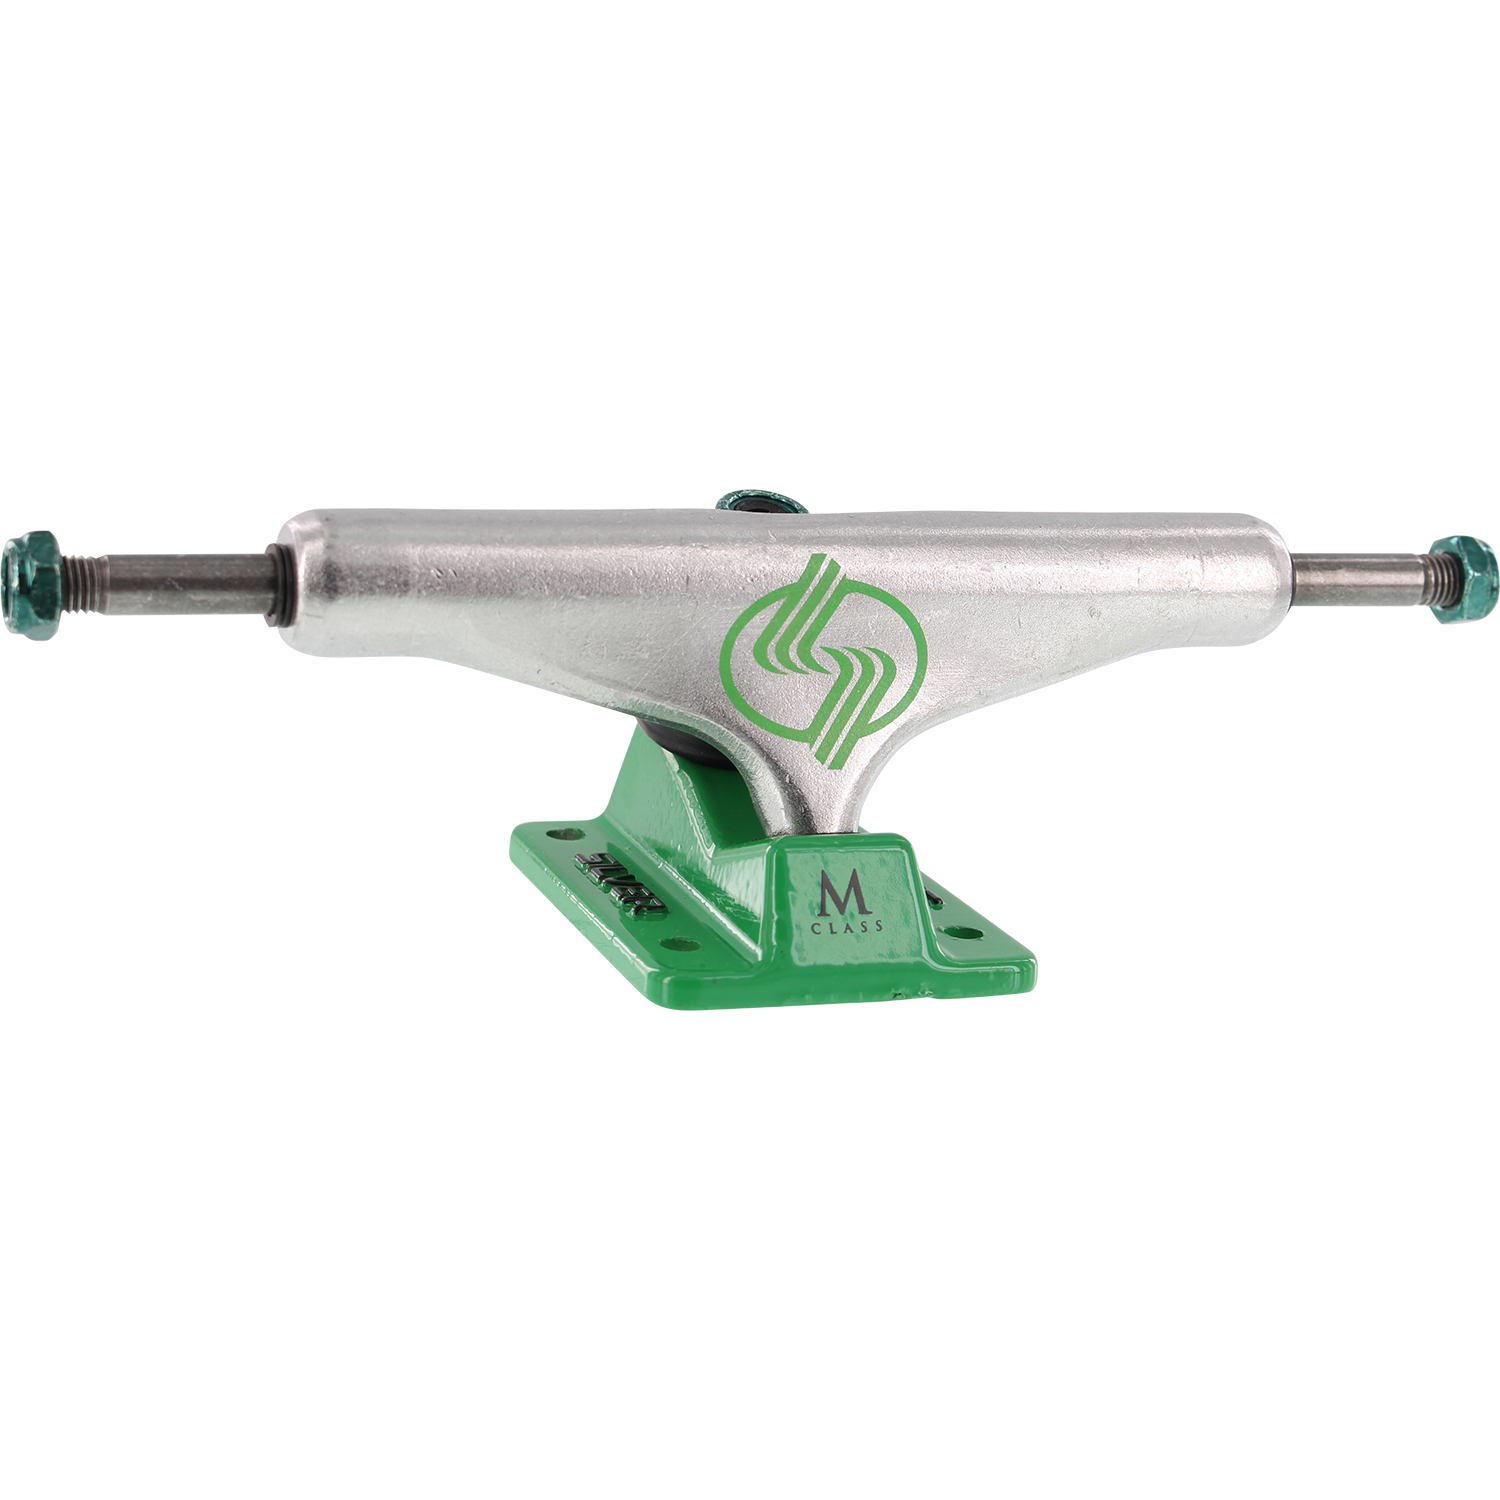 Silver M-Class Hollow 8.5 Polished/Green Skateboards Trucks (Set of 2)